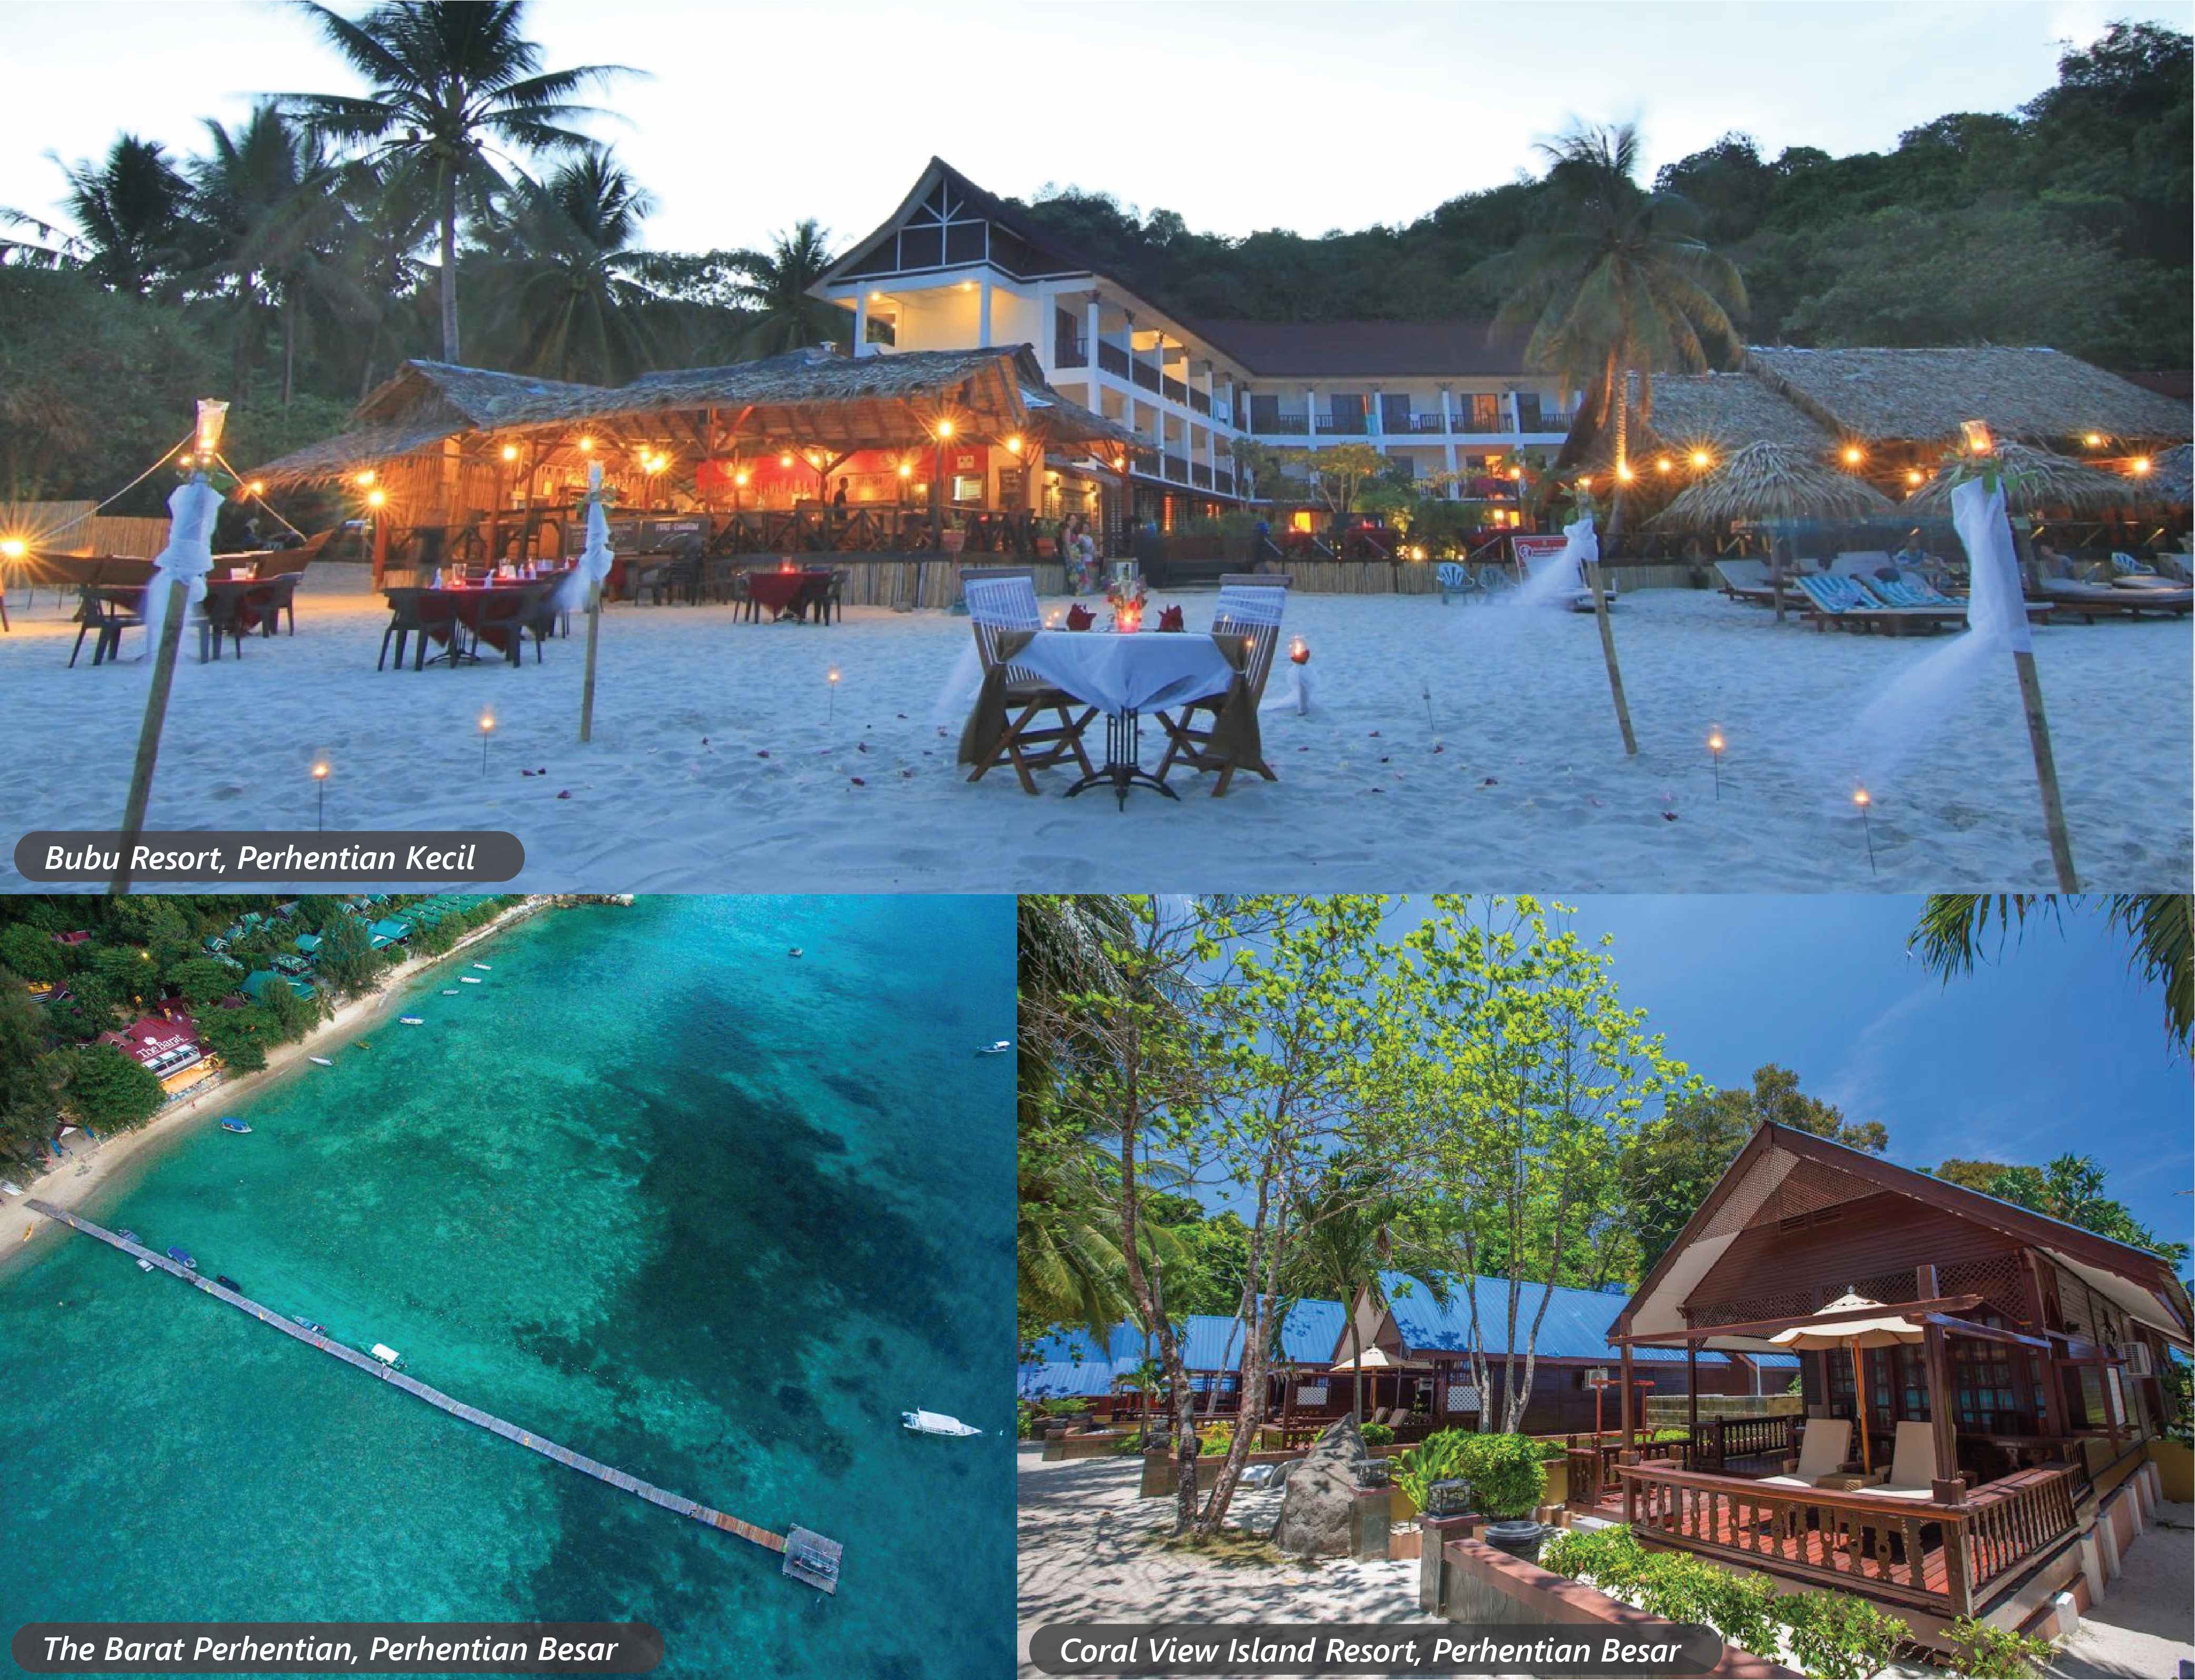 Accomodation options at Pulau Perhentian